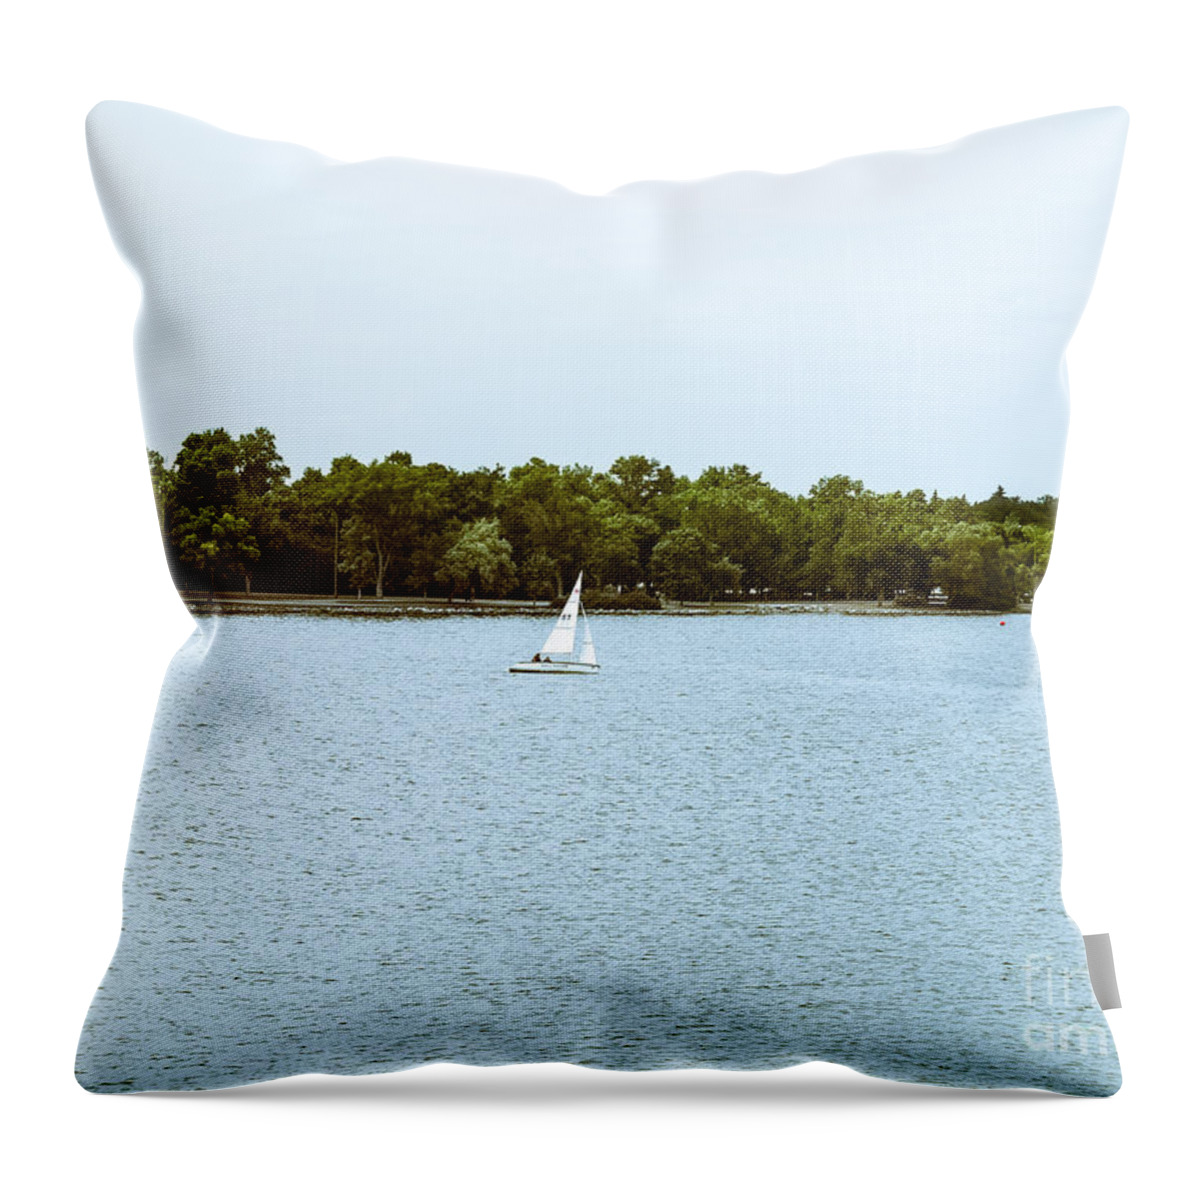 Wind Throw Pillow featuring the photograph Wascana -22 by David Fabian